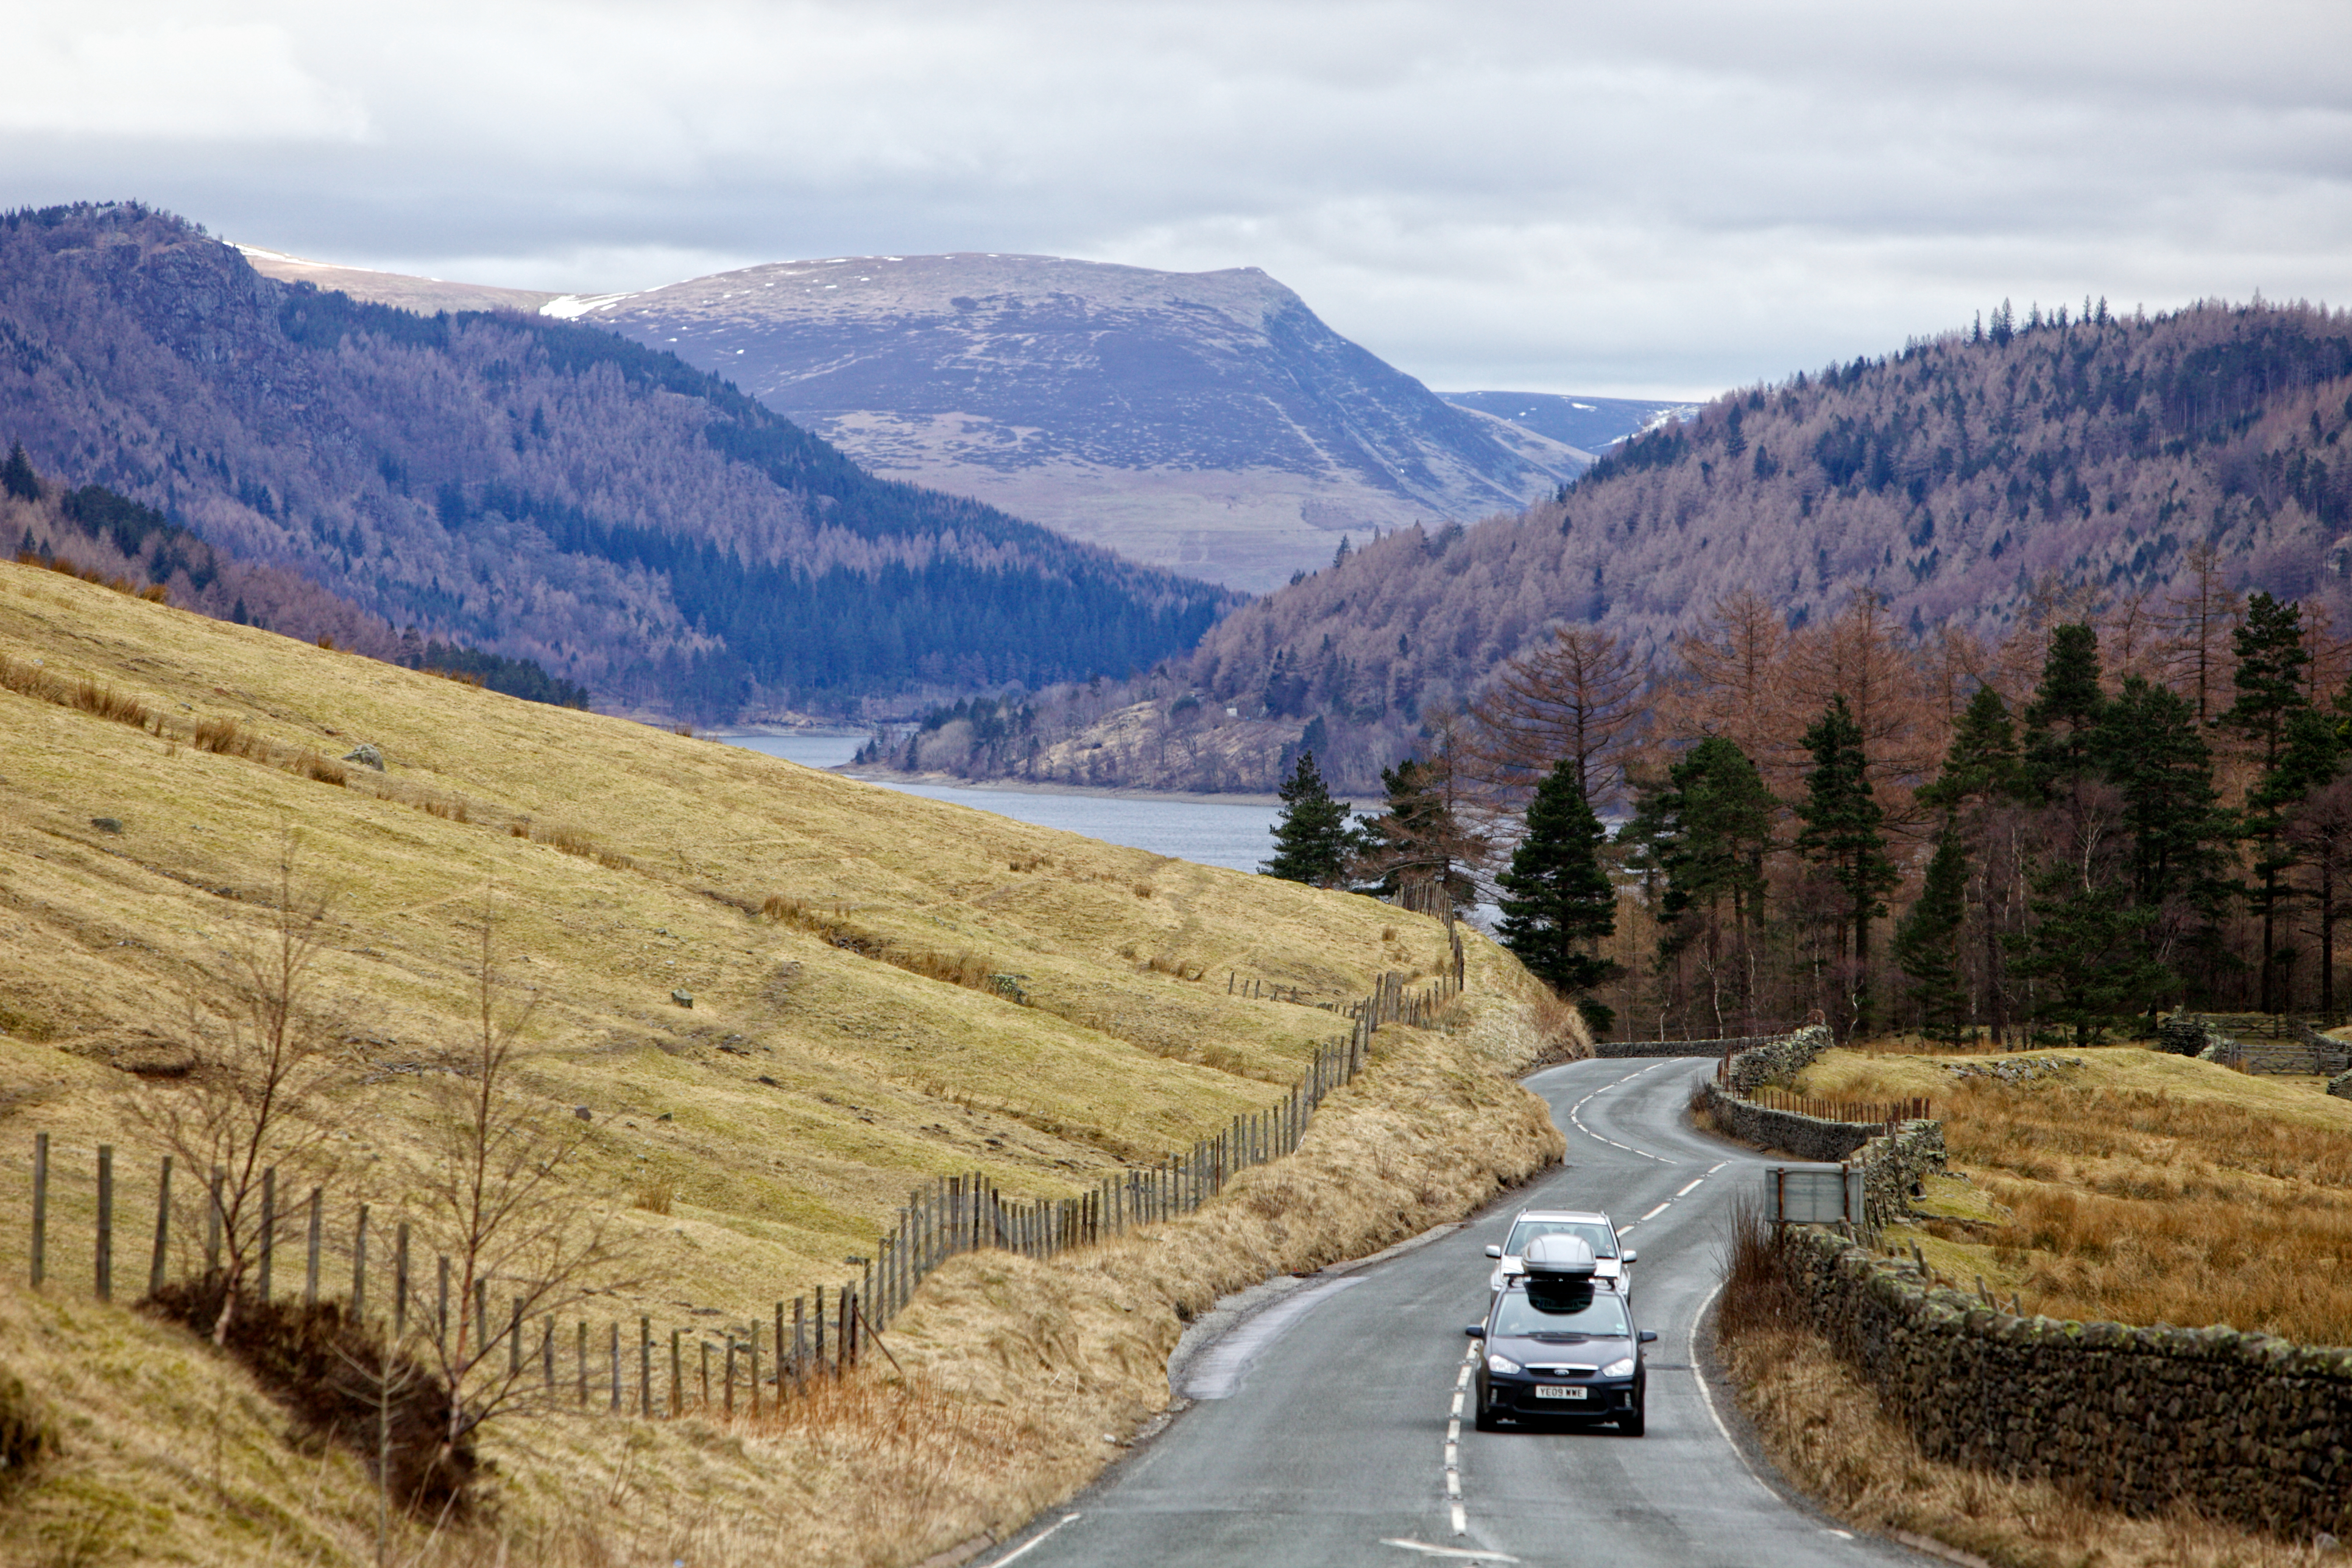 This is just a small part of the beautiful road that we drove to Keswick from Bowness-on-Windermere, with surrounding mountains, green fells and sparkling lakes to admire! (Photo courtesy of www.cumbriaphoto.co.uk.)